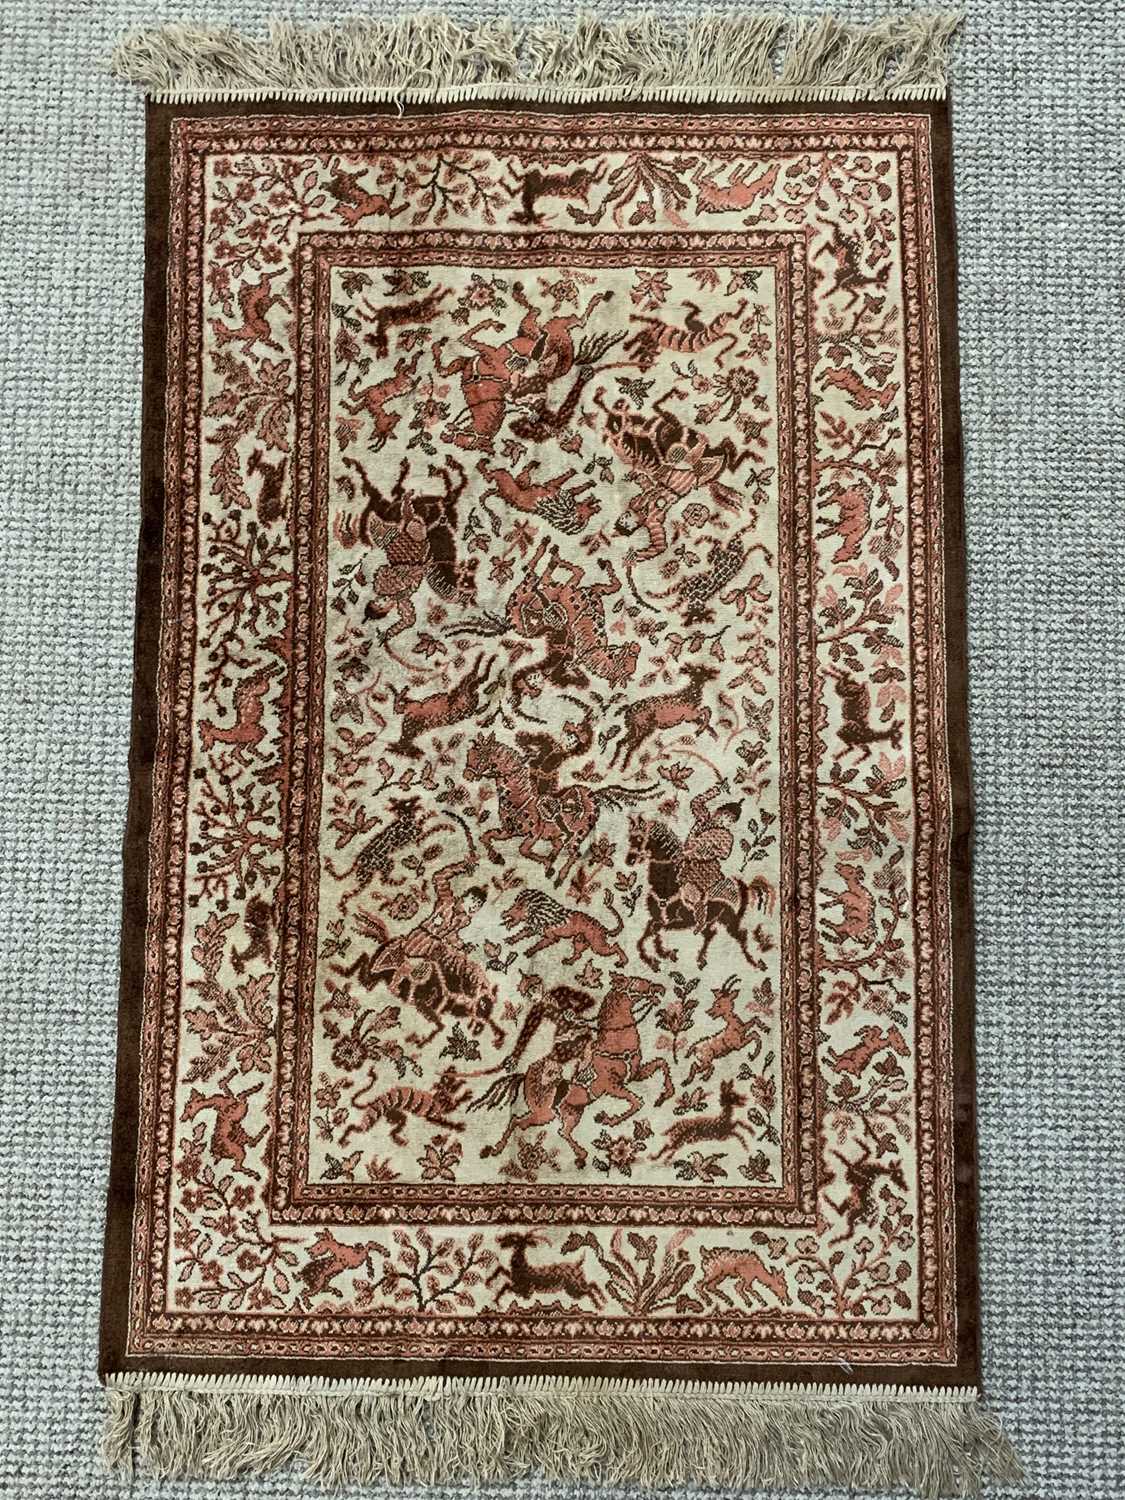 PERSIAN SILK STYLE RUG with animal patterned border and central hunt scene, 120 x 68cms - Image 2 of 3